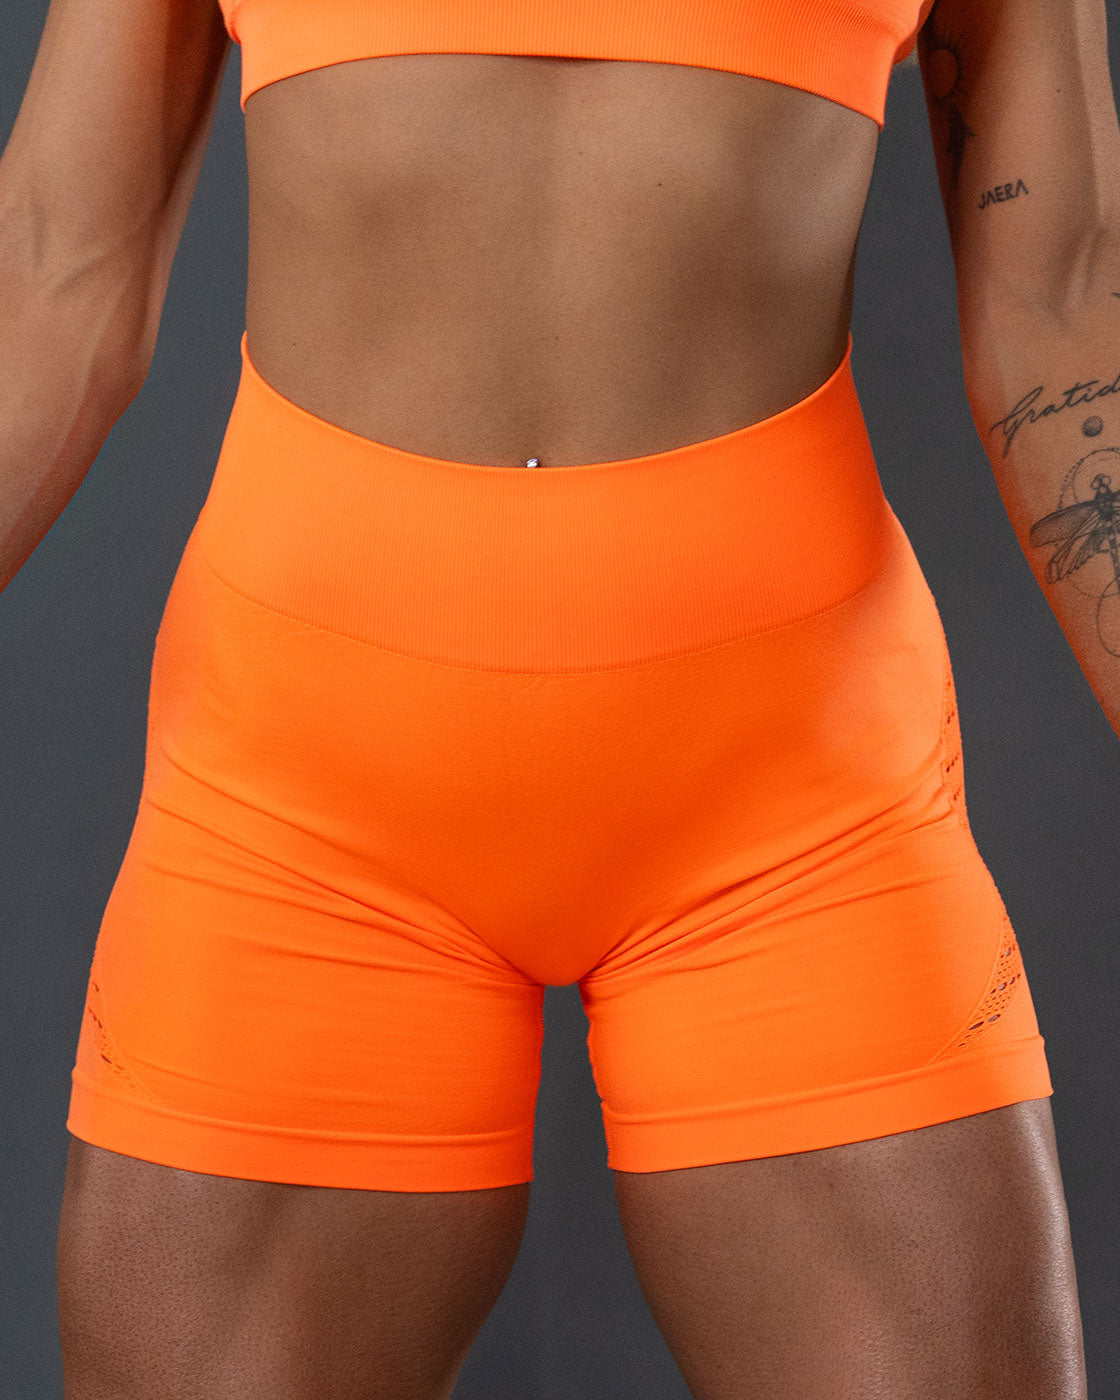 Bright Neon Orange 4 inch Inseam Spandex Compression Shorts - Spandex Shorts  in 4 inseam - Lots of Colors & Styles